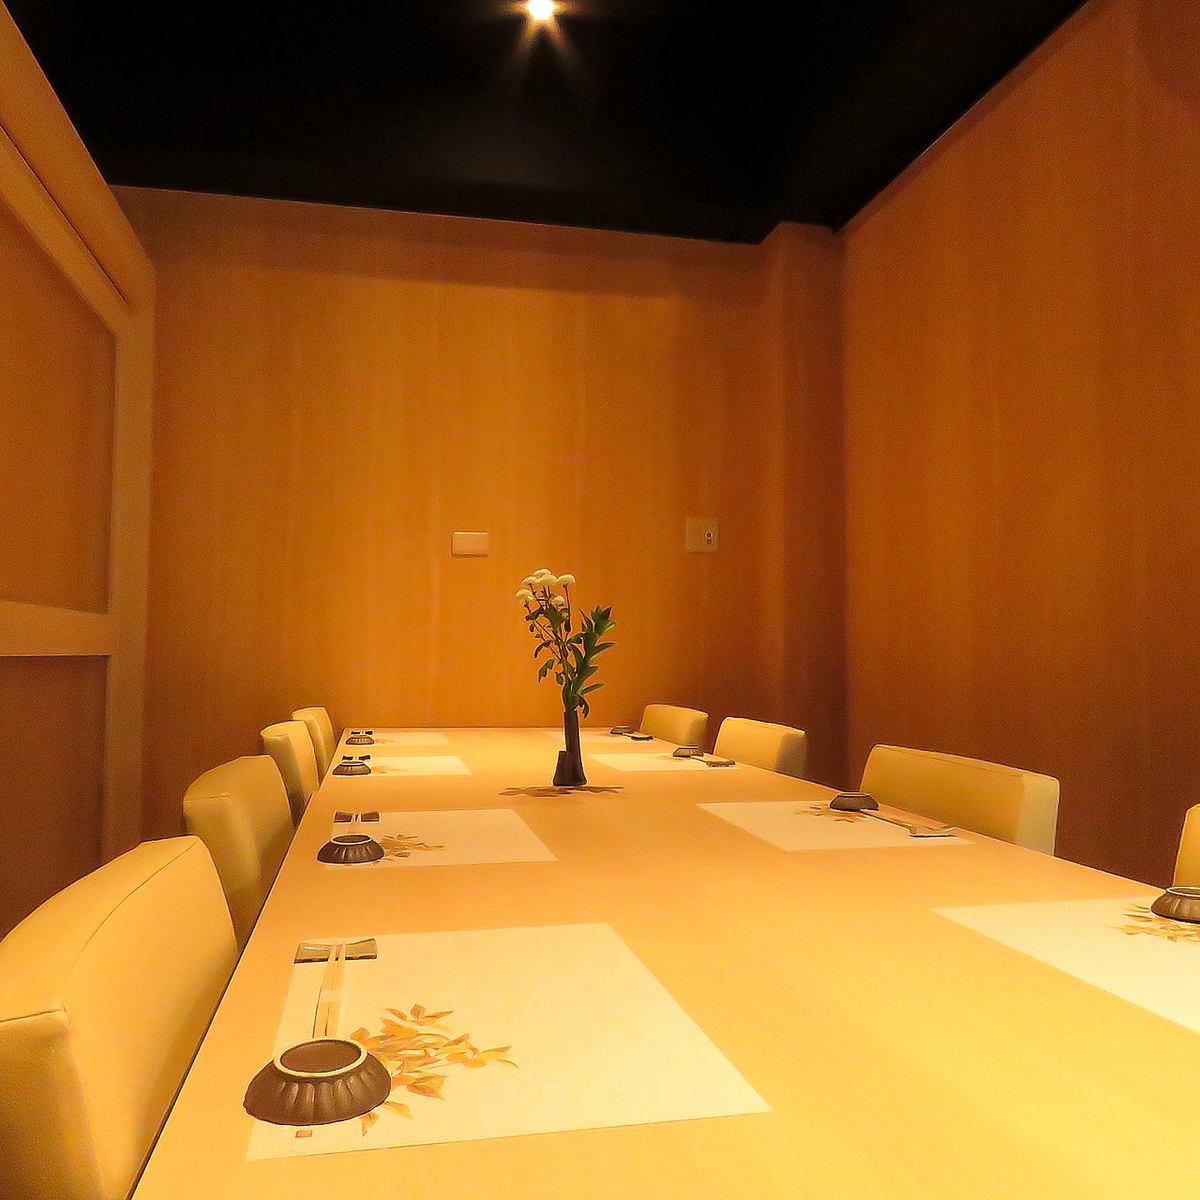 We also have private rooms that can be used for entertaining parties and dinner parties.